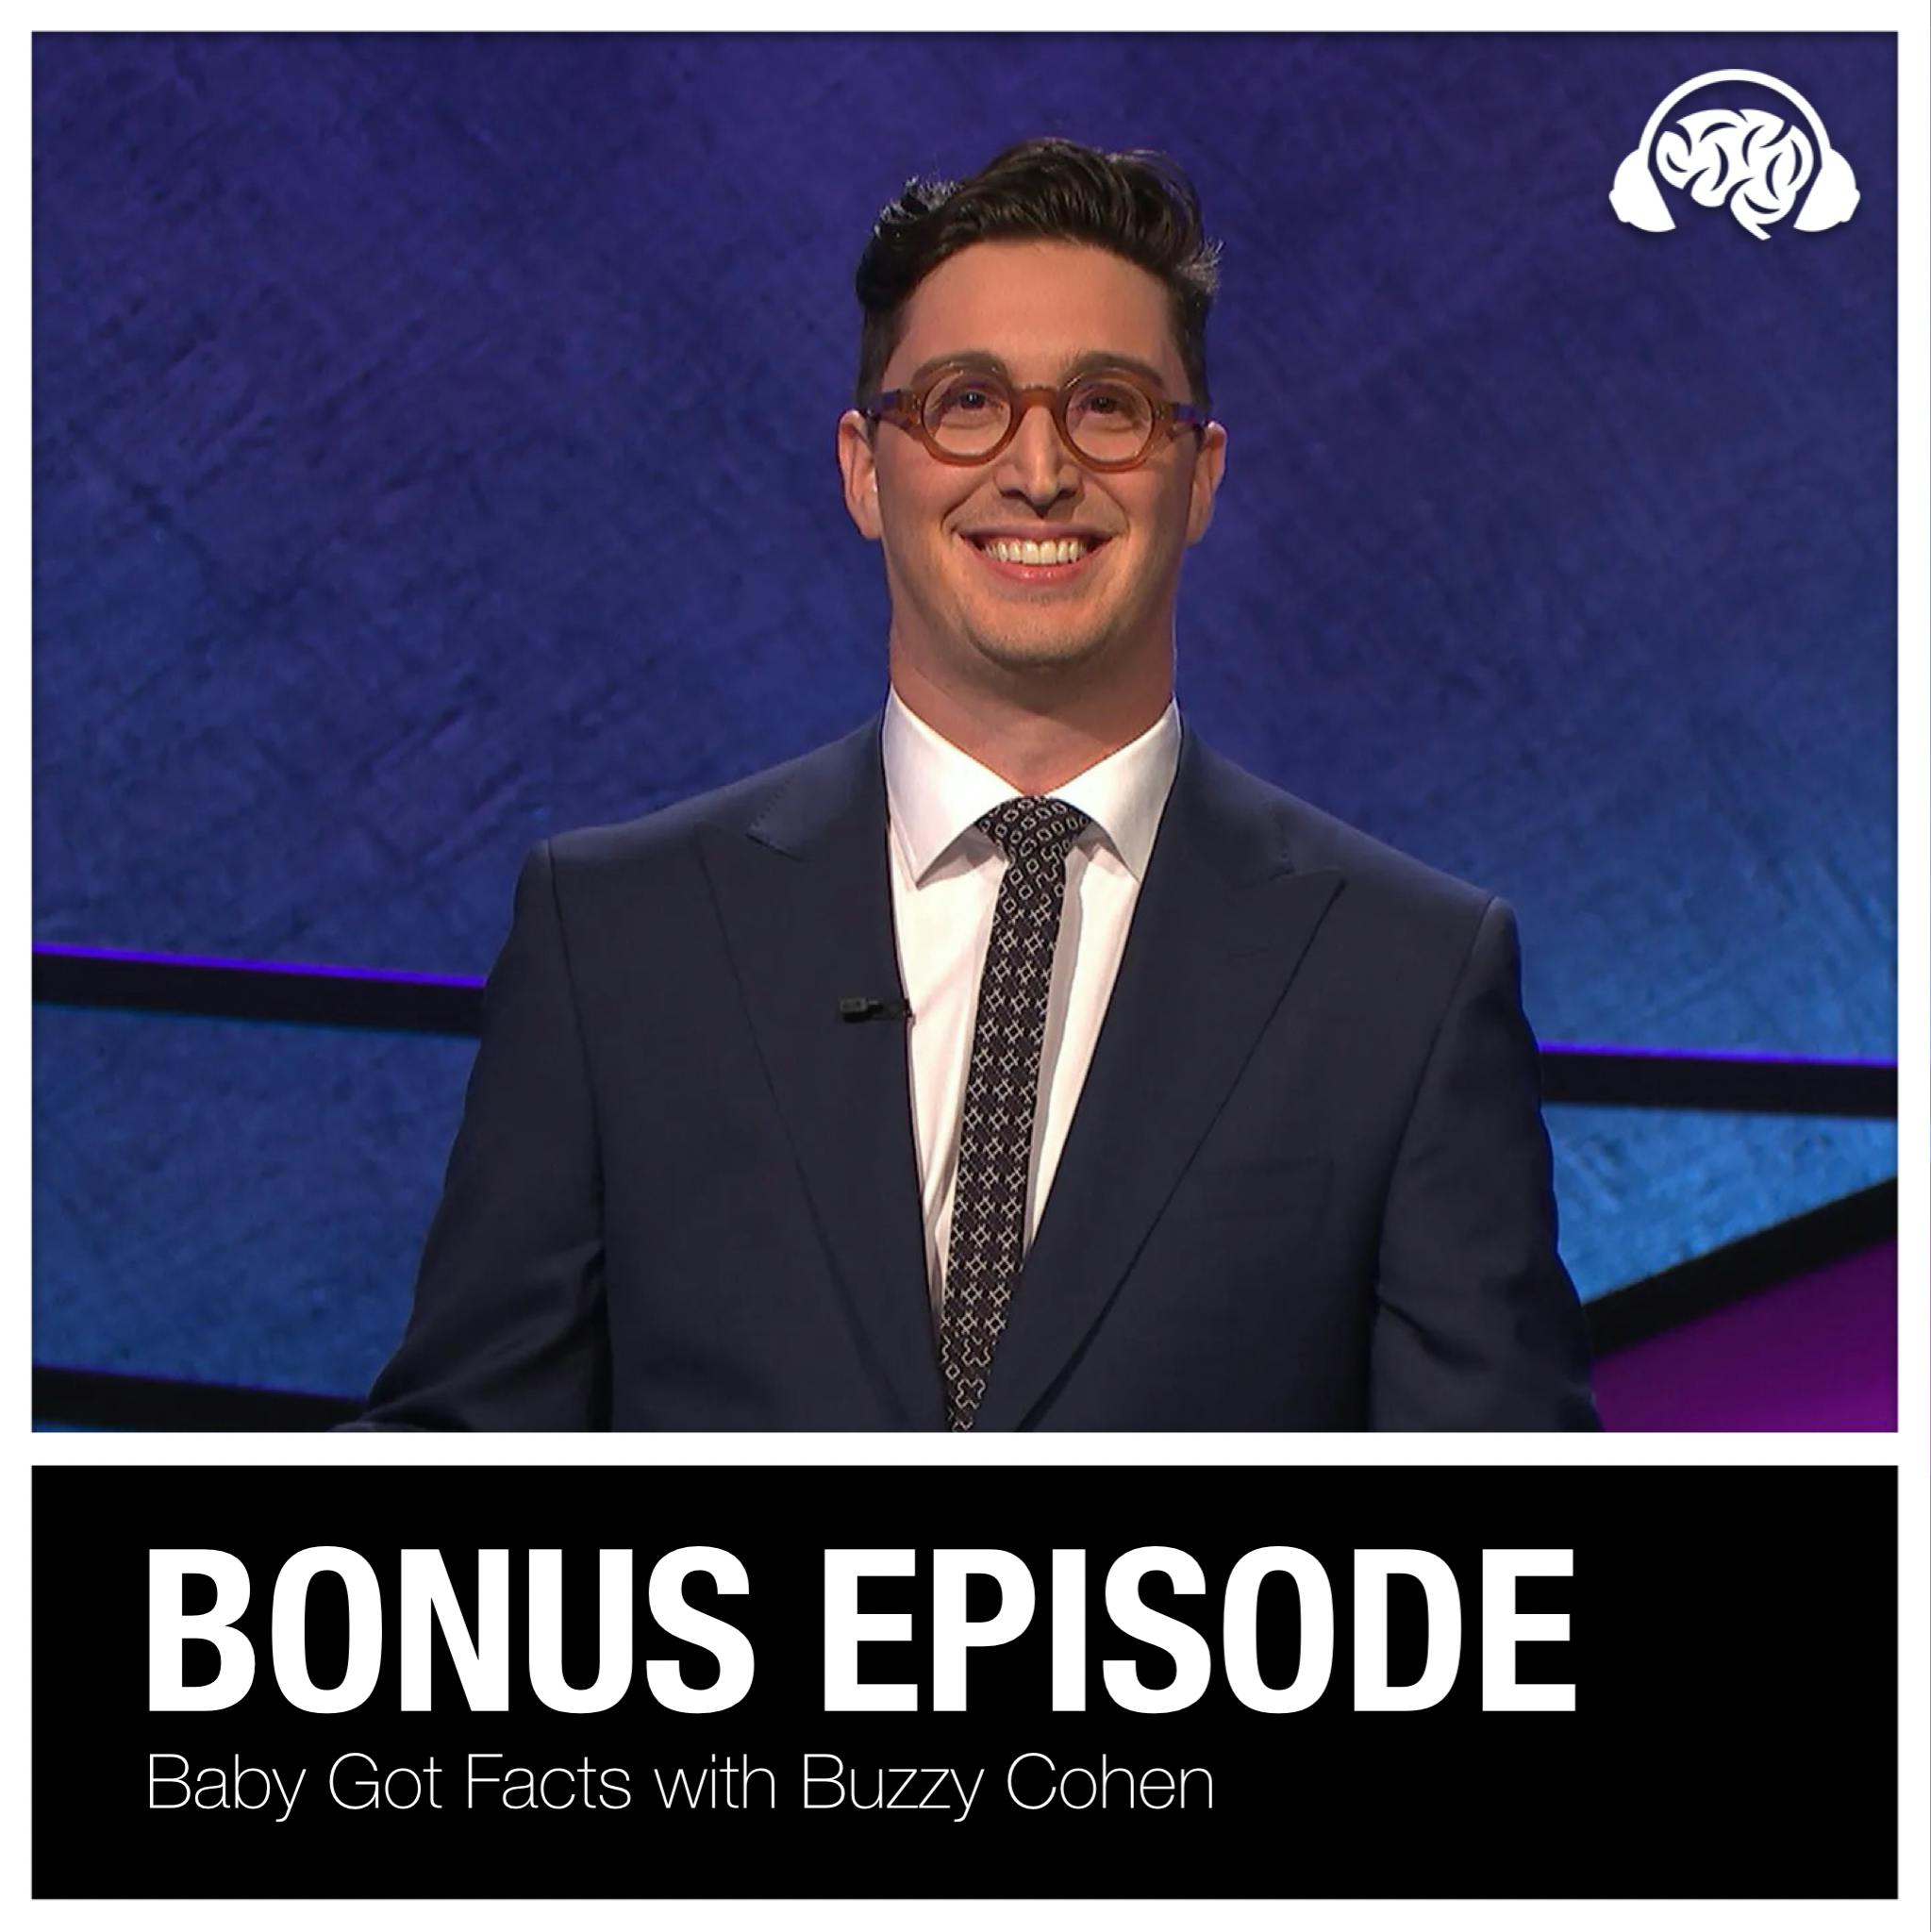 Bonus: Baby Got Facts with Buzzy Cohen